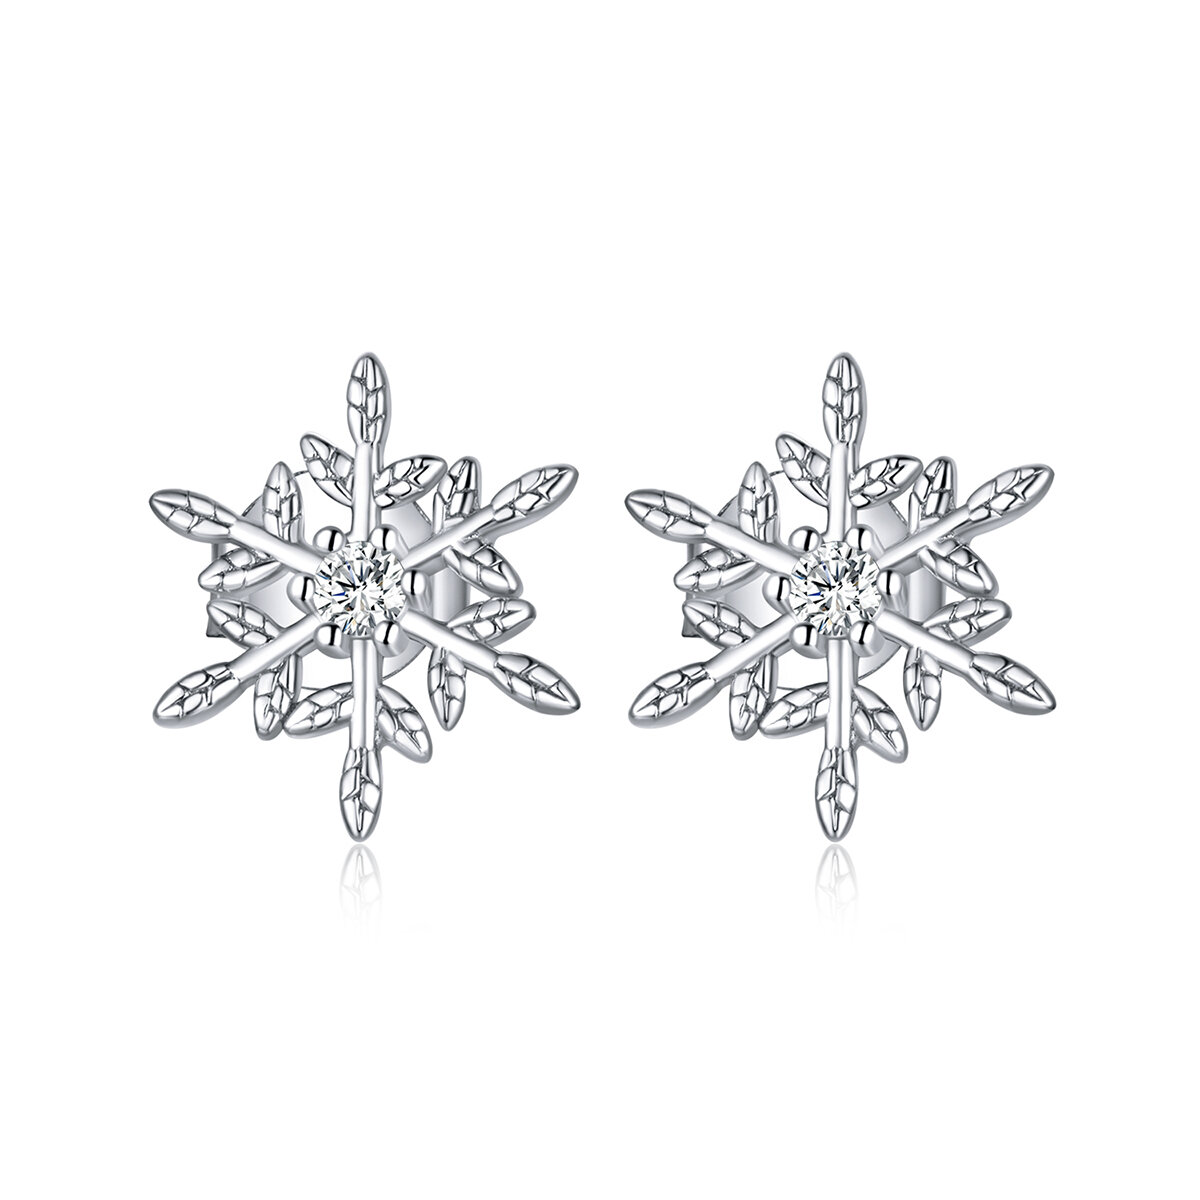 GemKing BSE424 Romantic snowflakes S925 Sterling Silver Earring